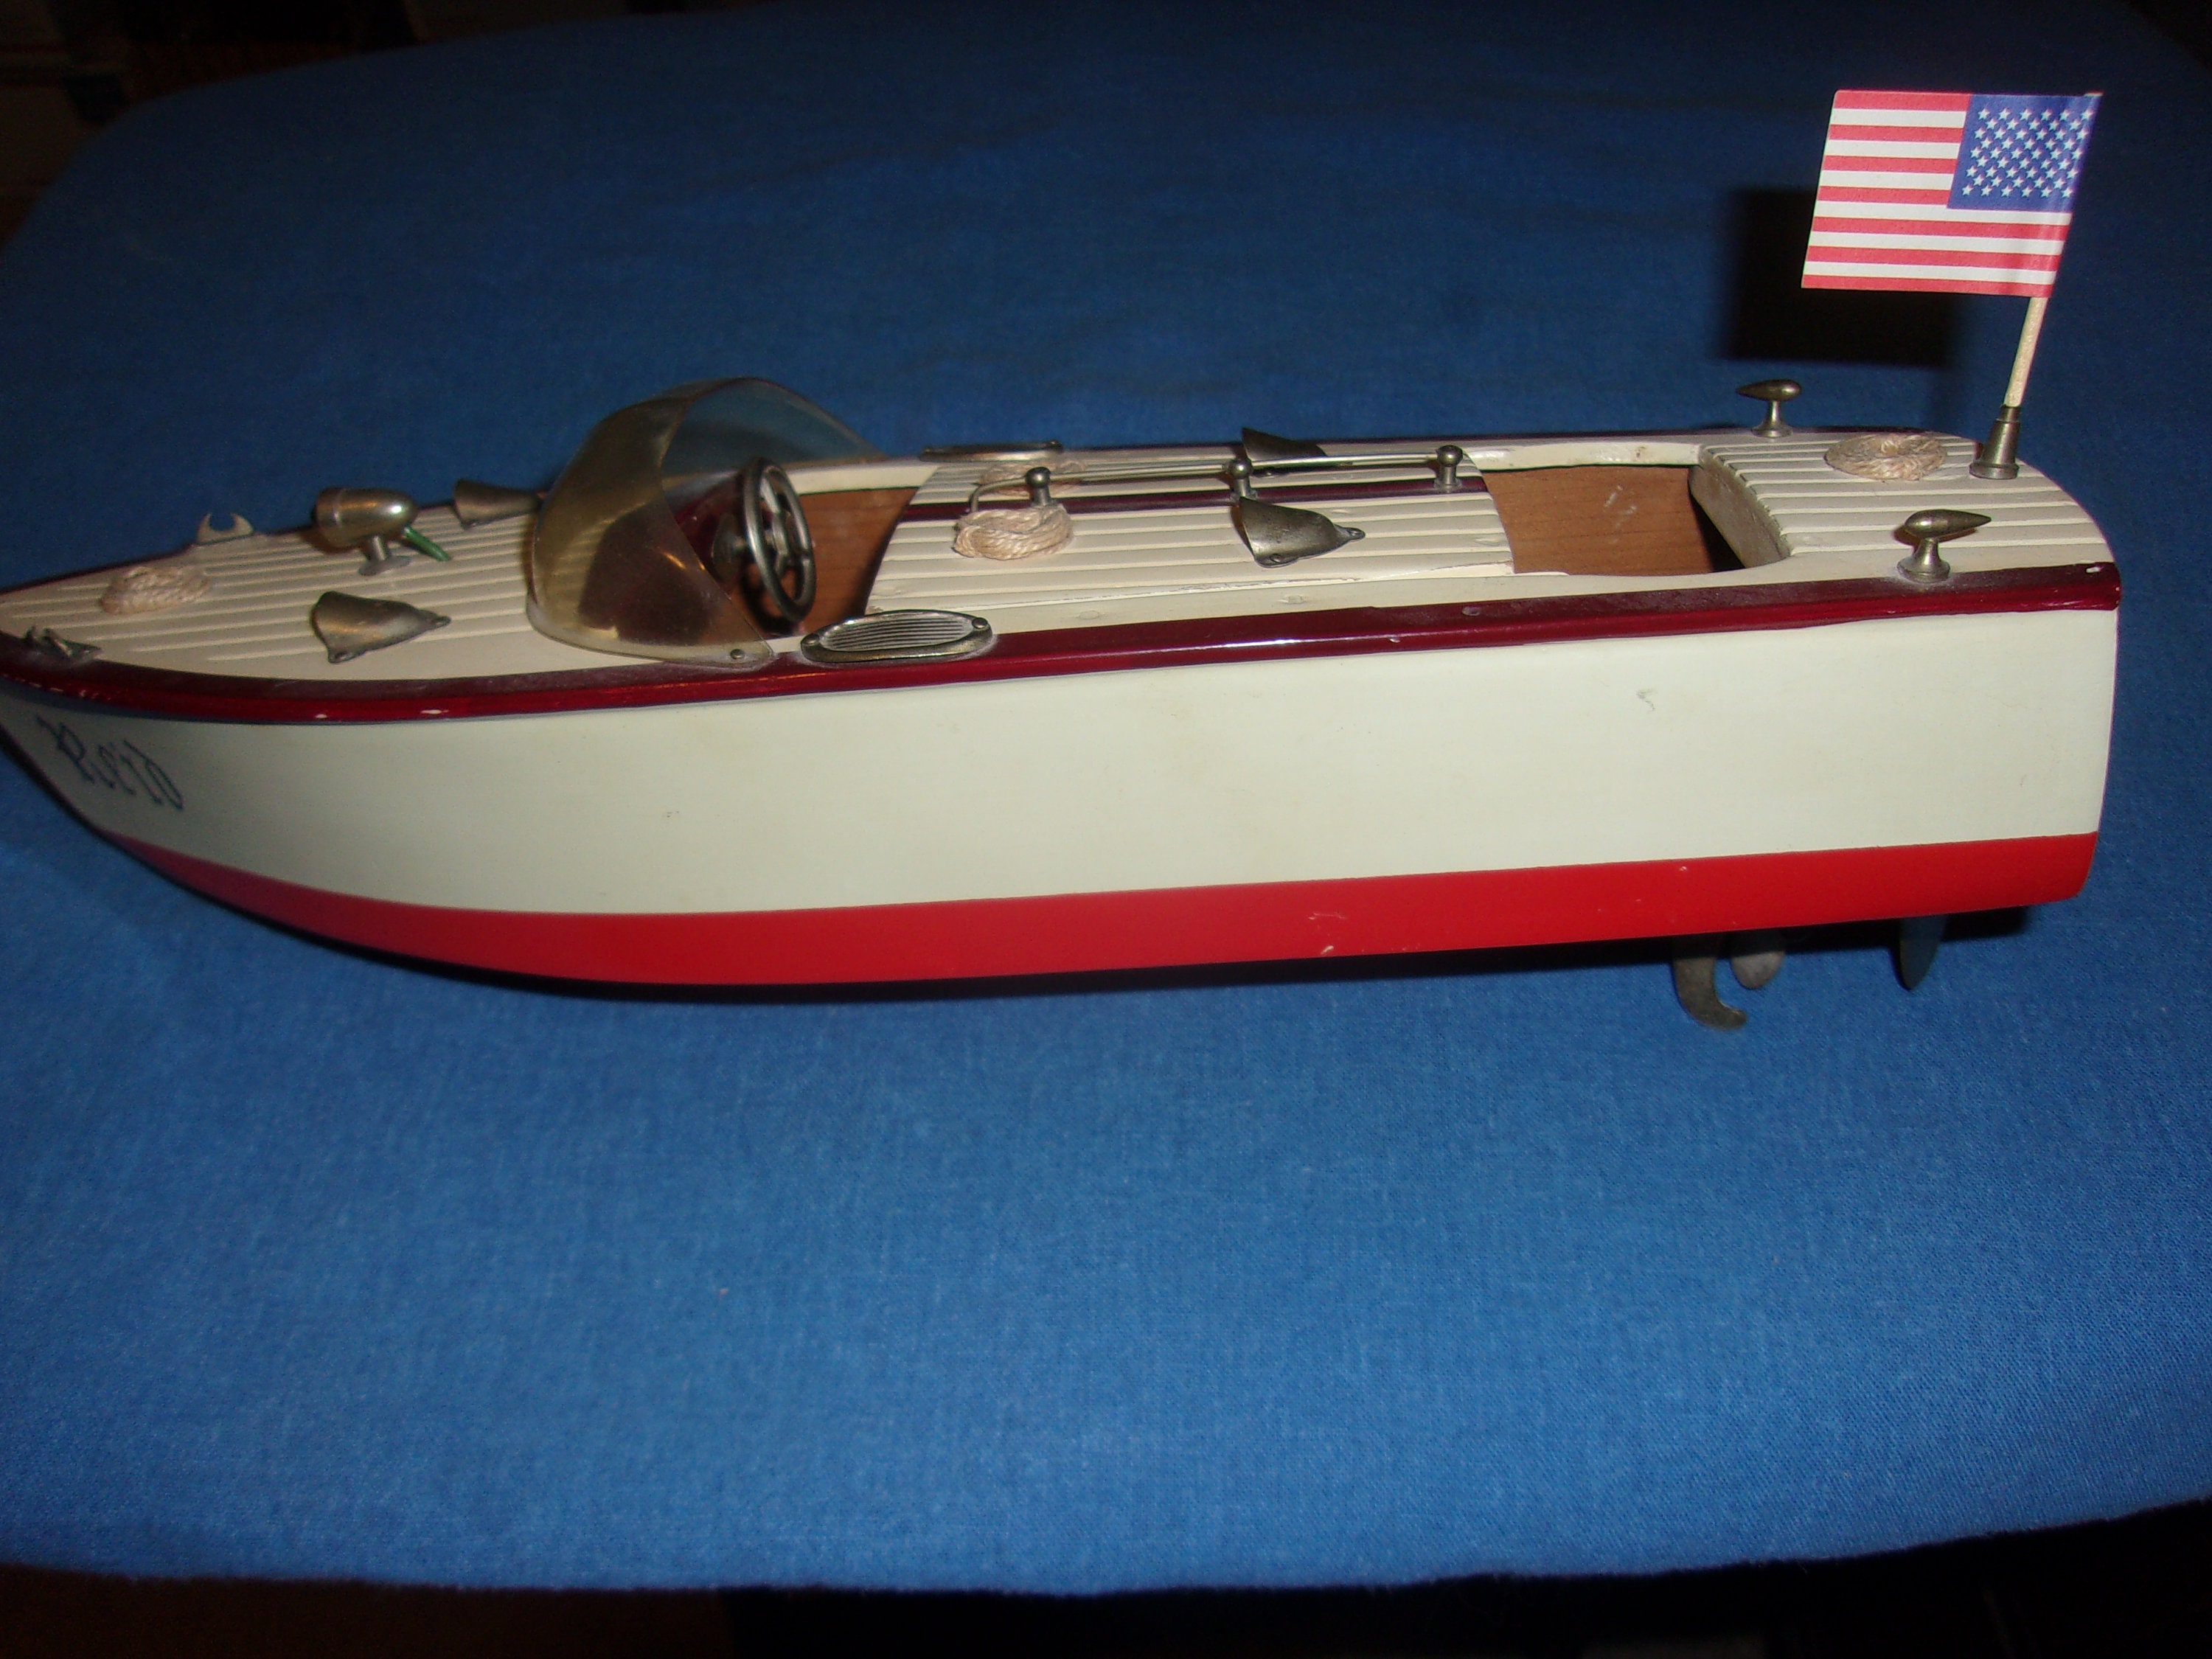 Vintage Olson Radio Co Outboard Boat Toy Motor, Model Boats